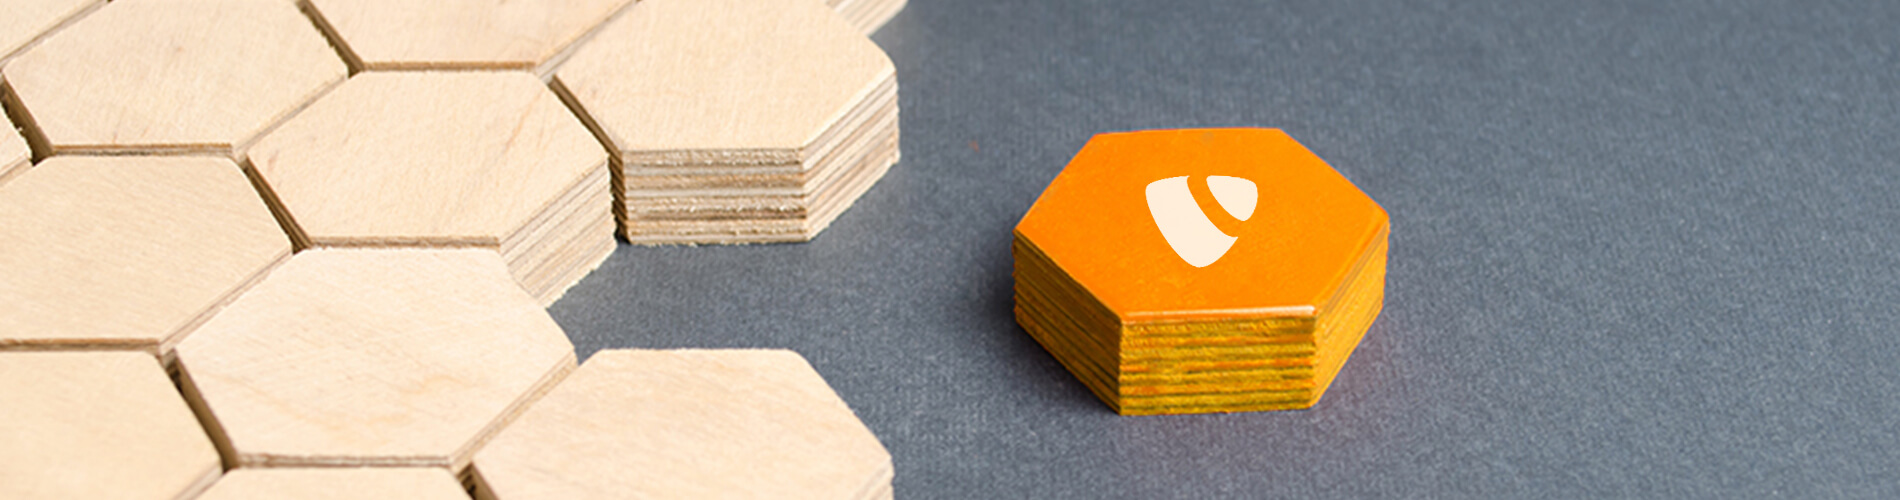 How to check TYPO3 Compatibility for your next TYPO3 upgrade?